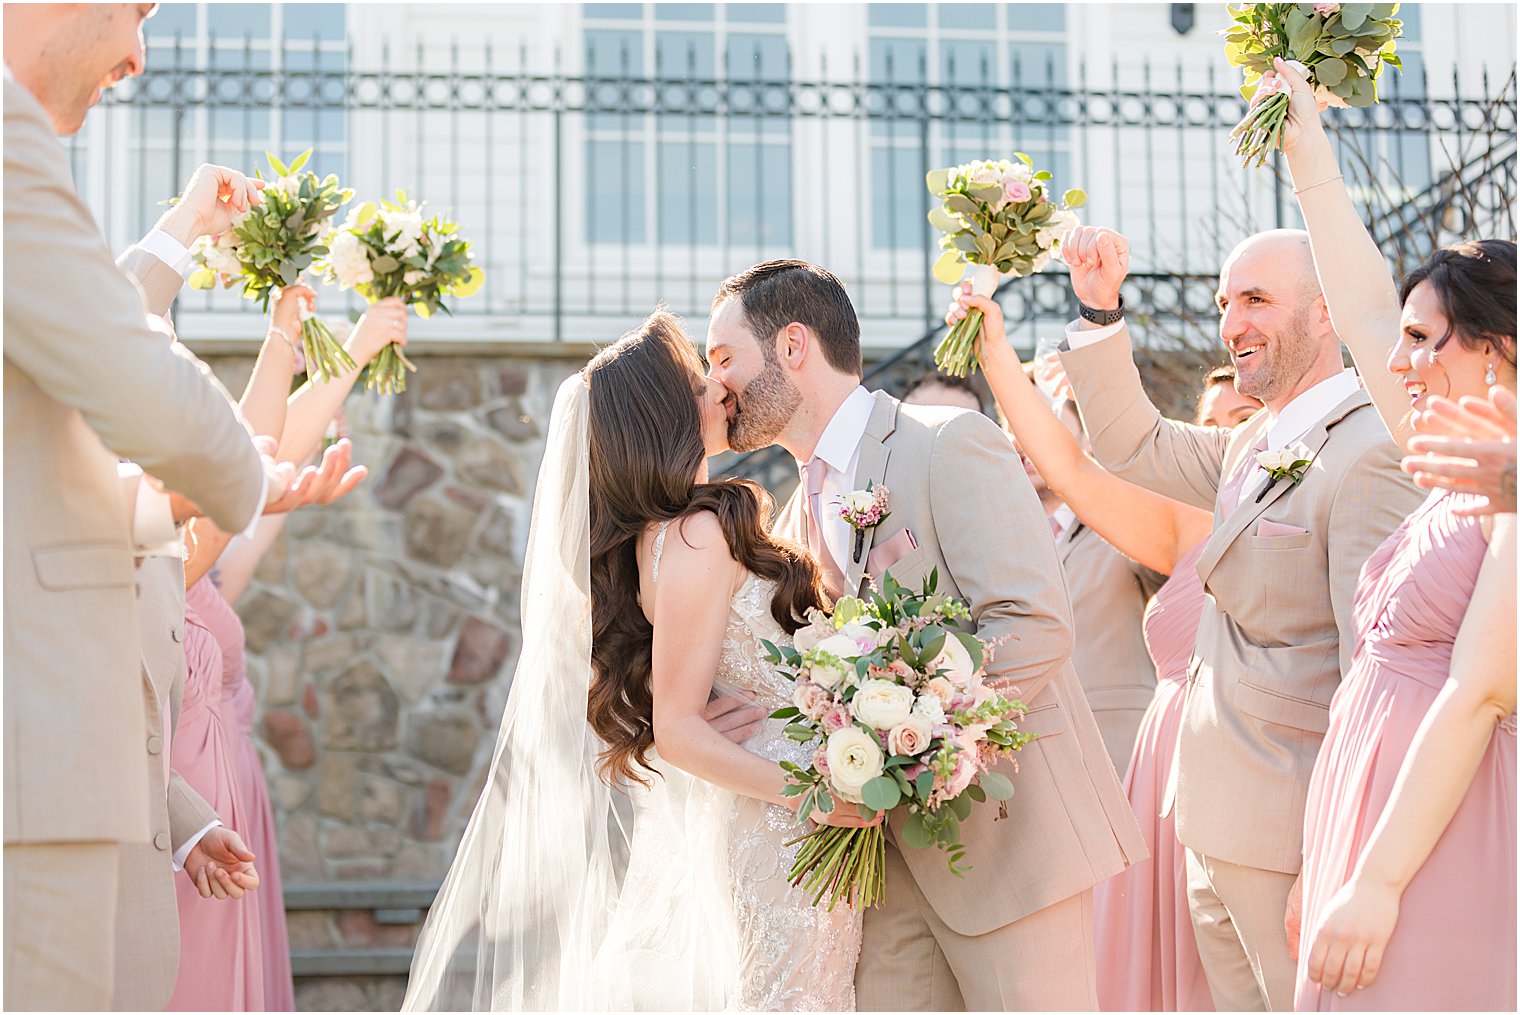 newlyweds kiss with bridal party cheering behind them 